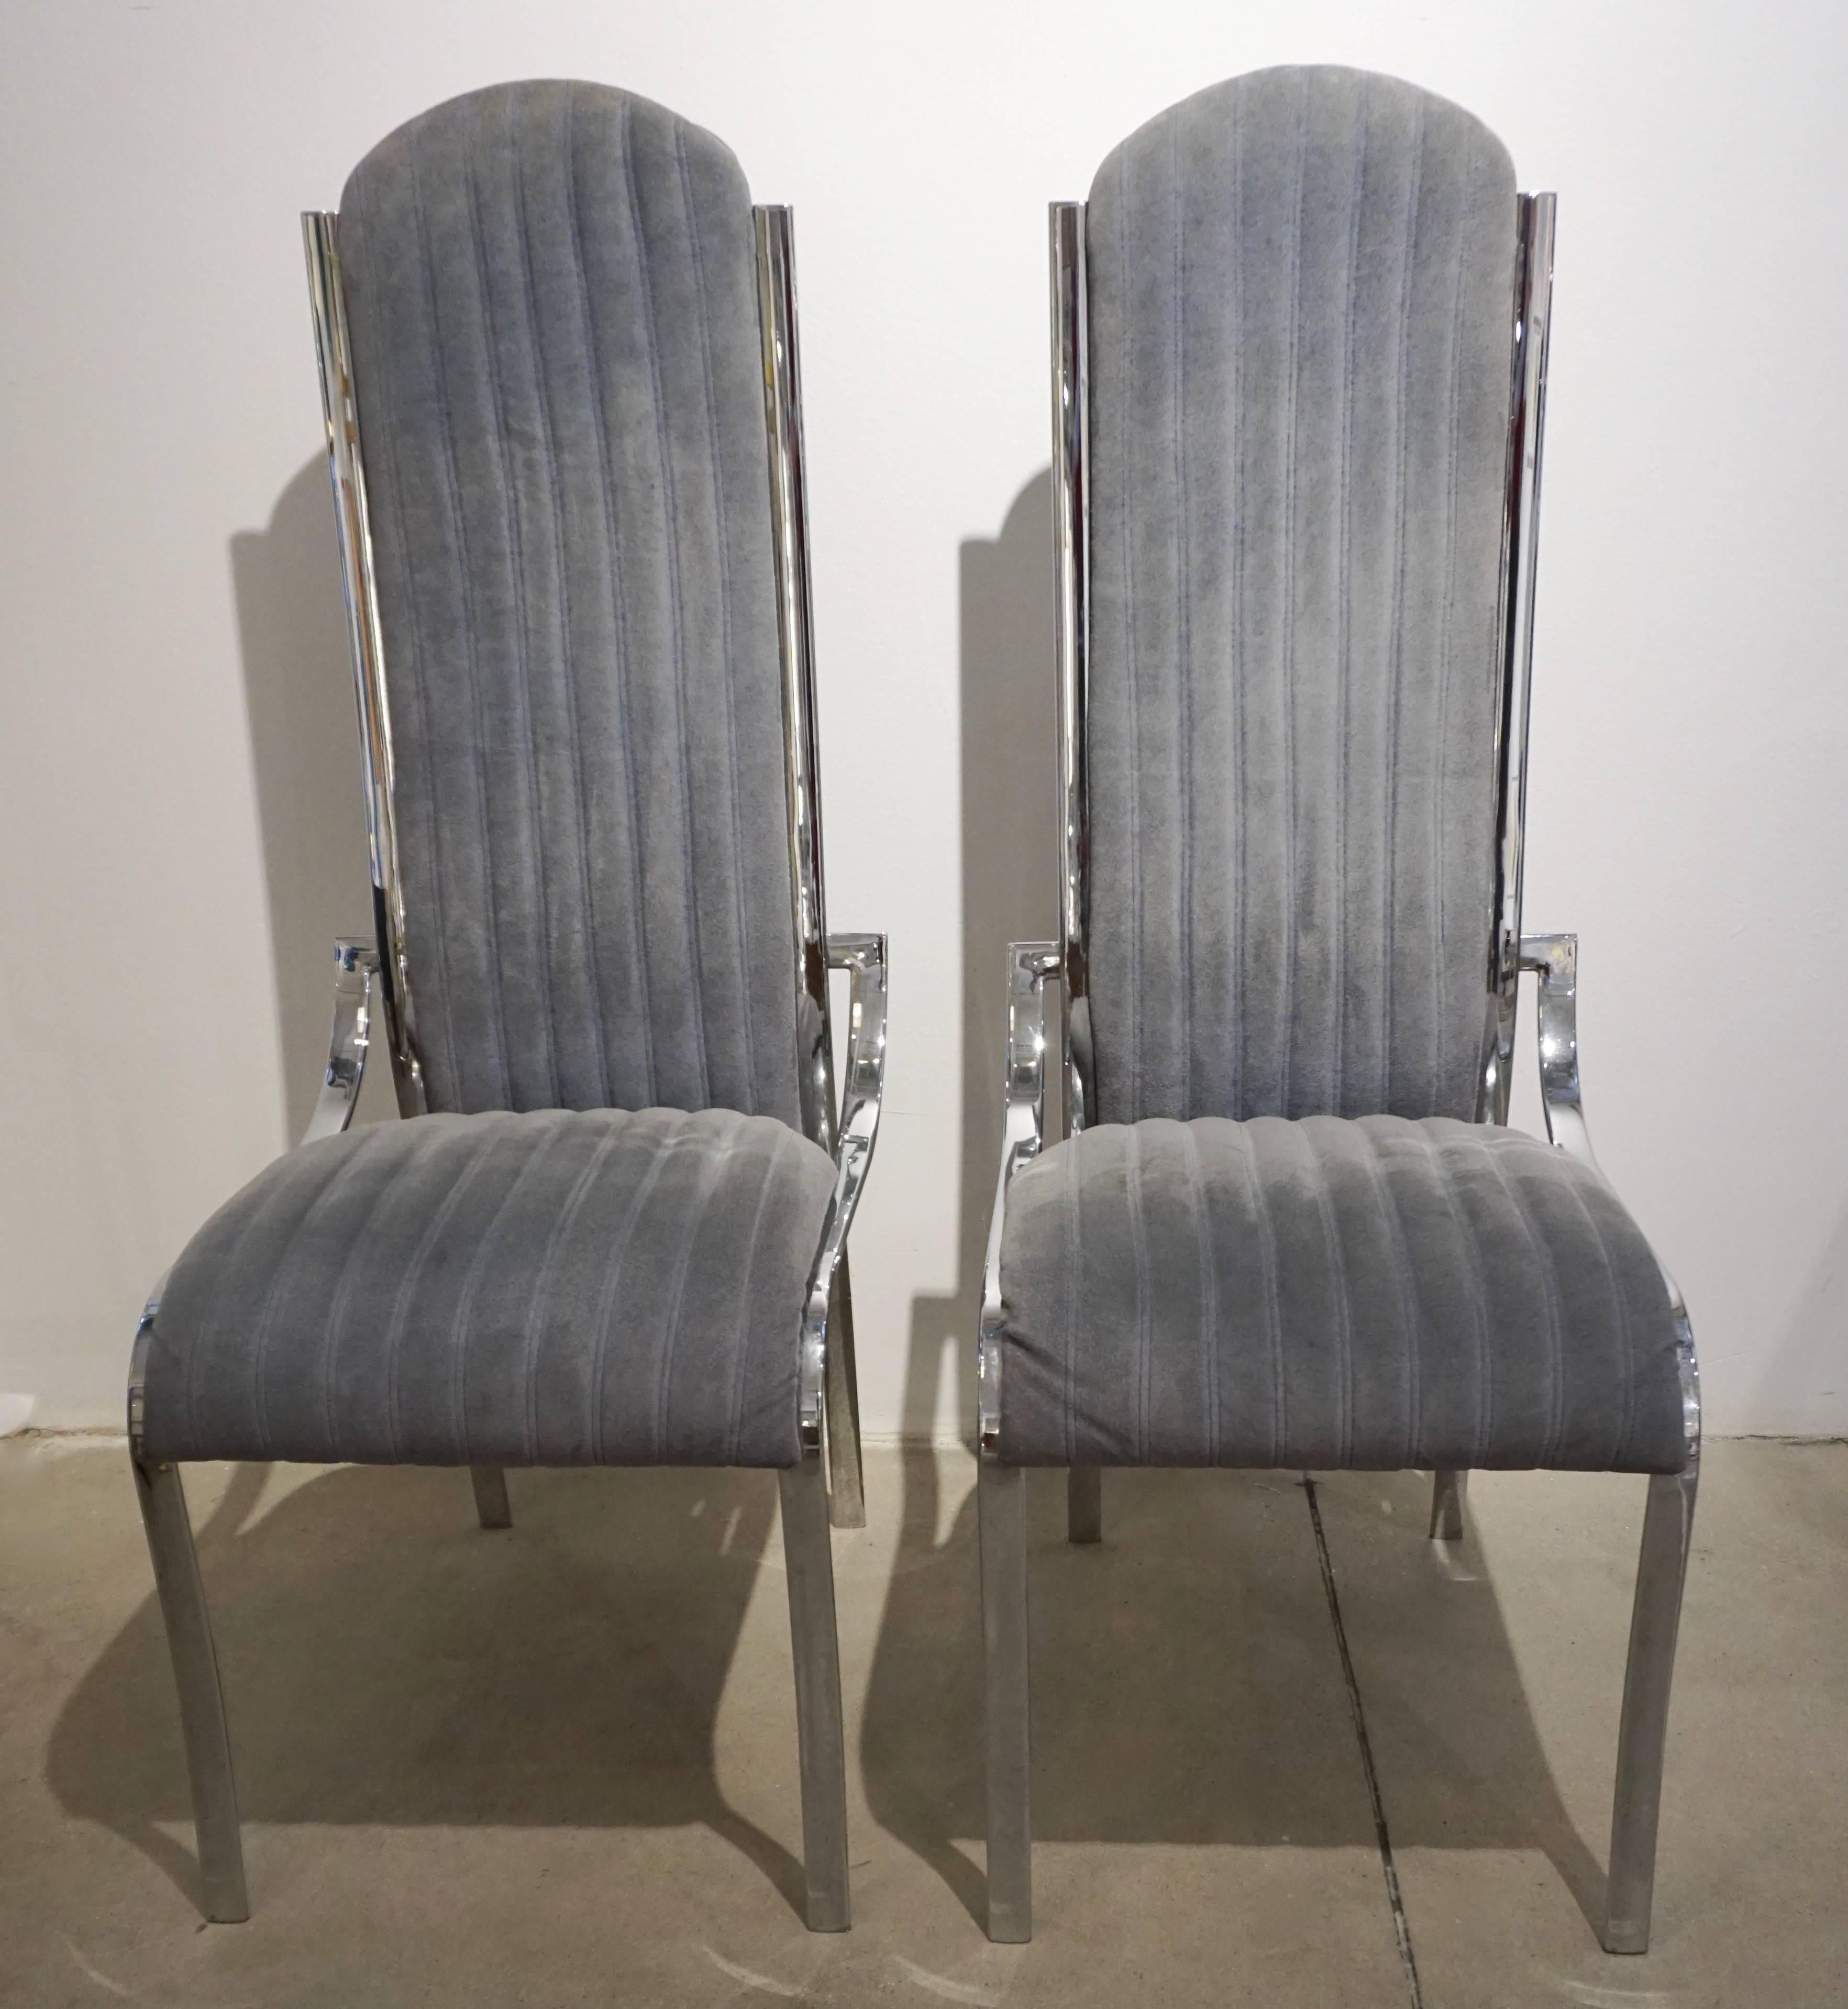 Late 20th Century Italian Vintage Four Curved High Back Chrome Chairs in Blue Gray Stitch Fabric For Sale